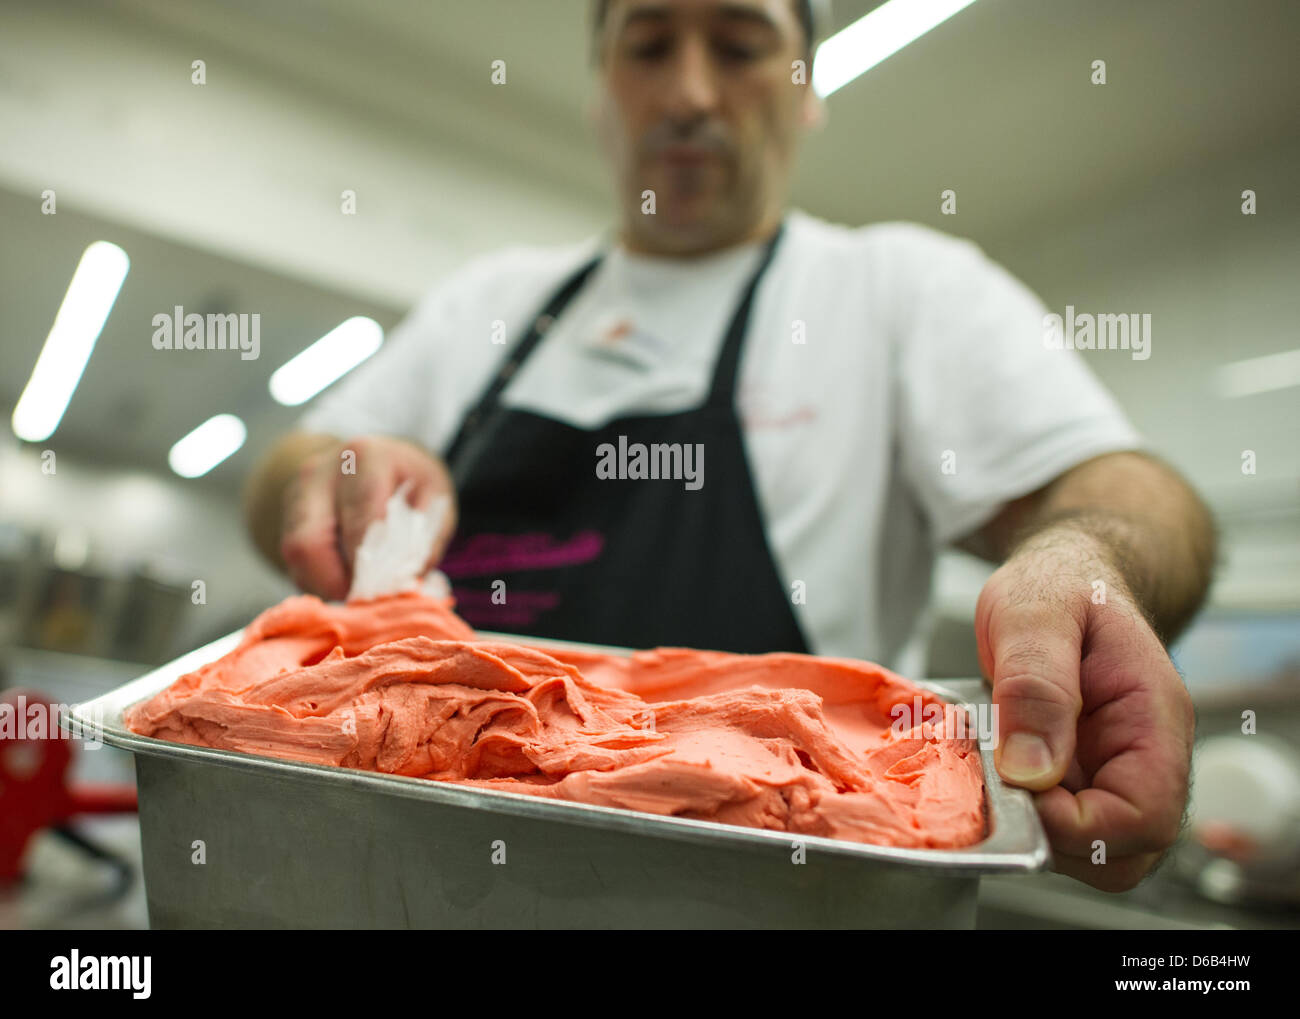 An employee of the ice-cream manufacturer Aperto from the Fontanella company a container with strawberry ice-cream in Mannheim, Germany, 17 August 2012. The family company has made ice-cream for almost 90 years. Photo: Uwe Anspach Stock Photo